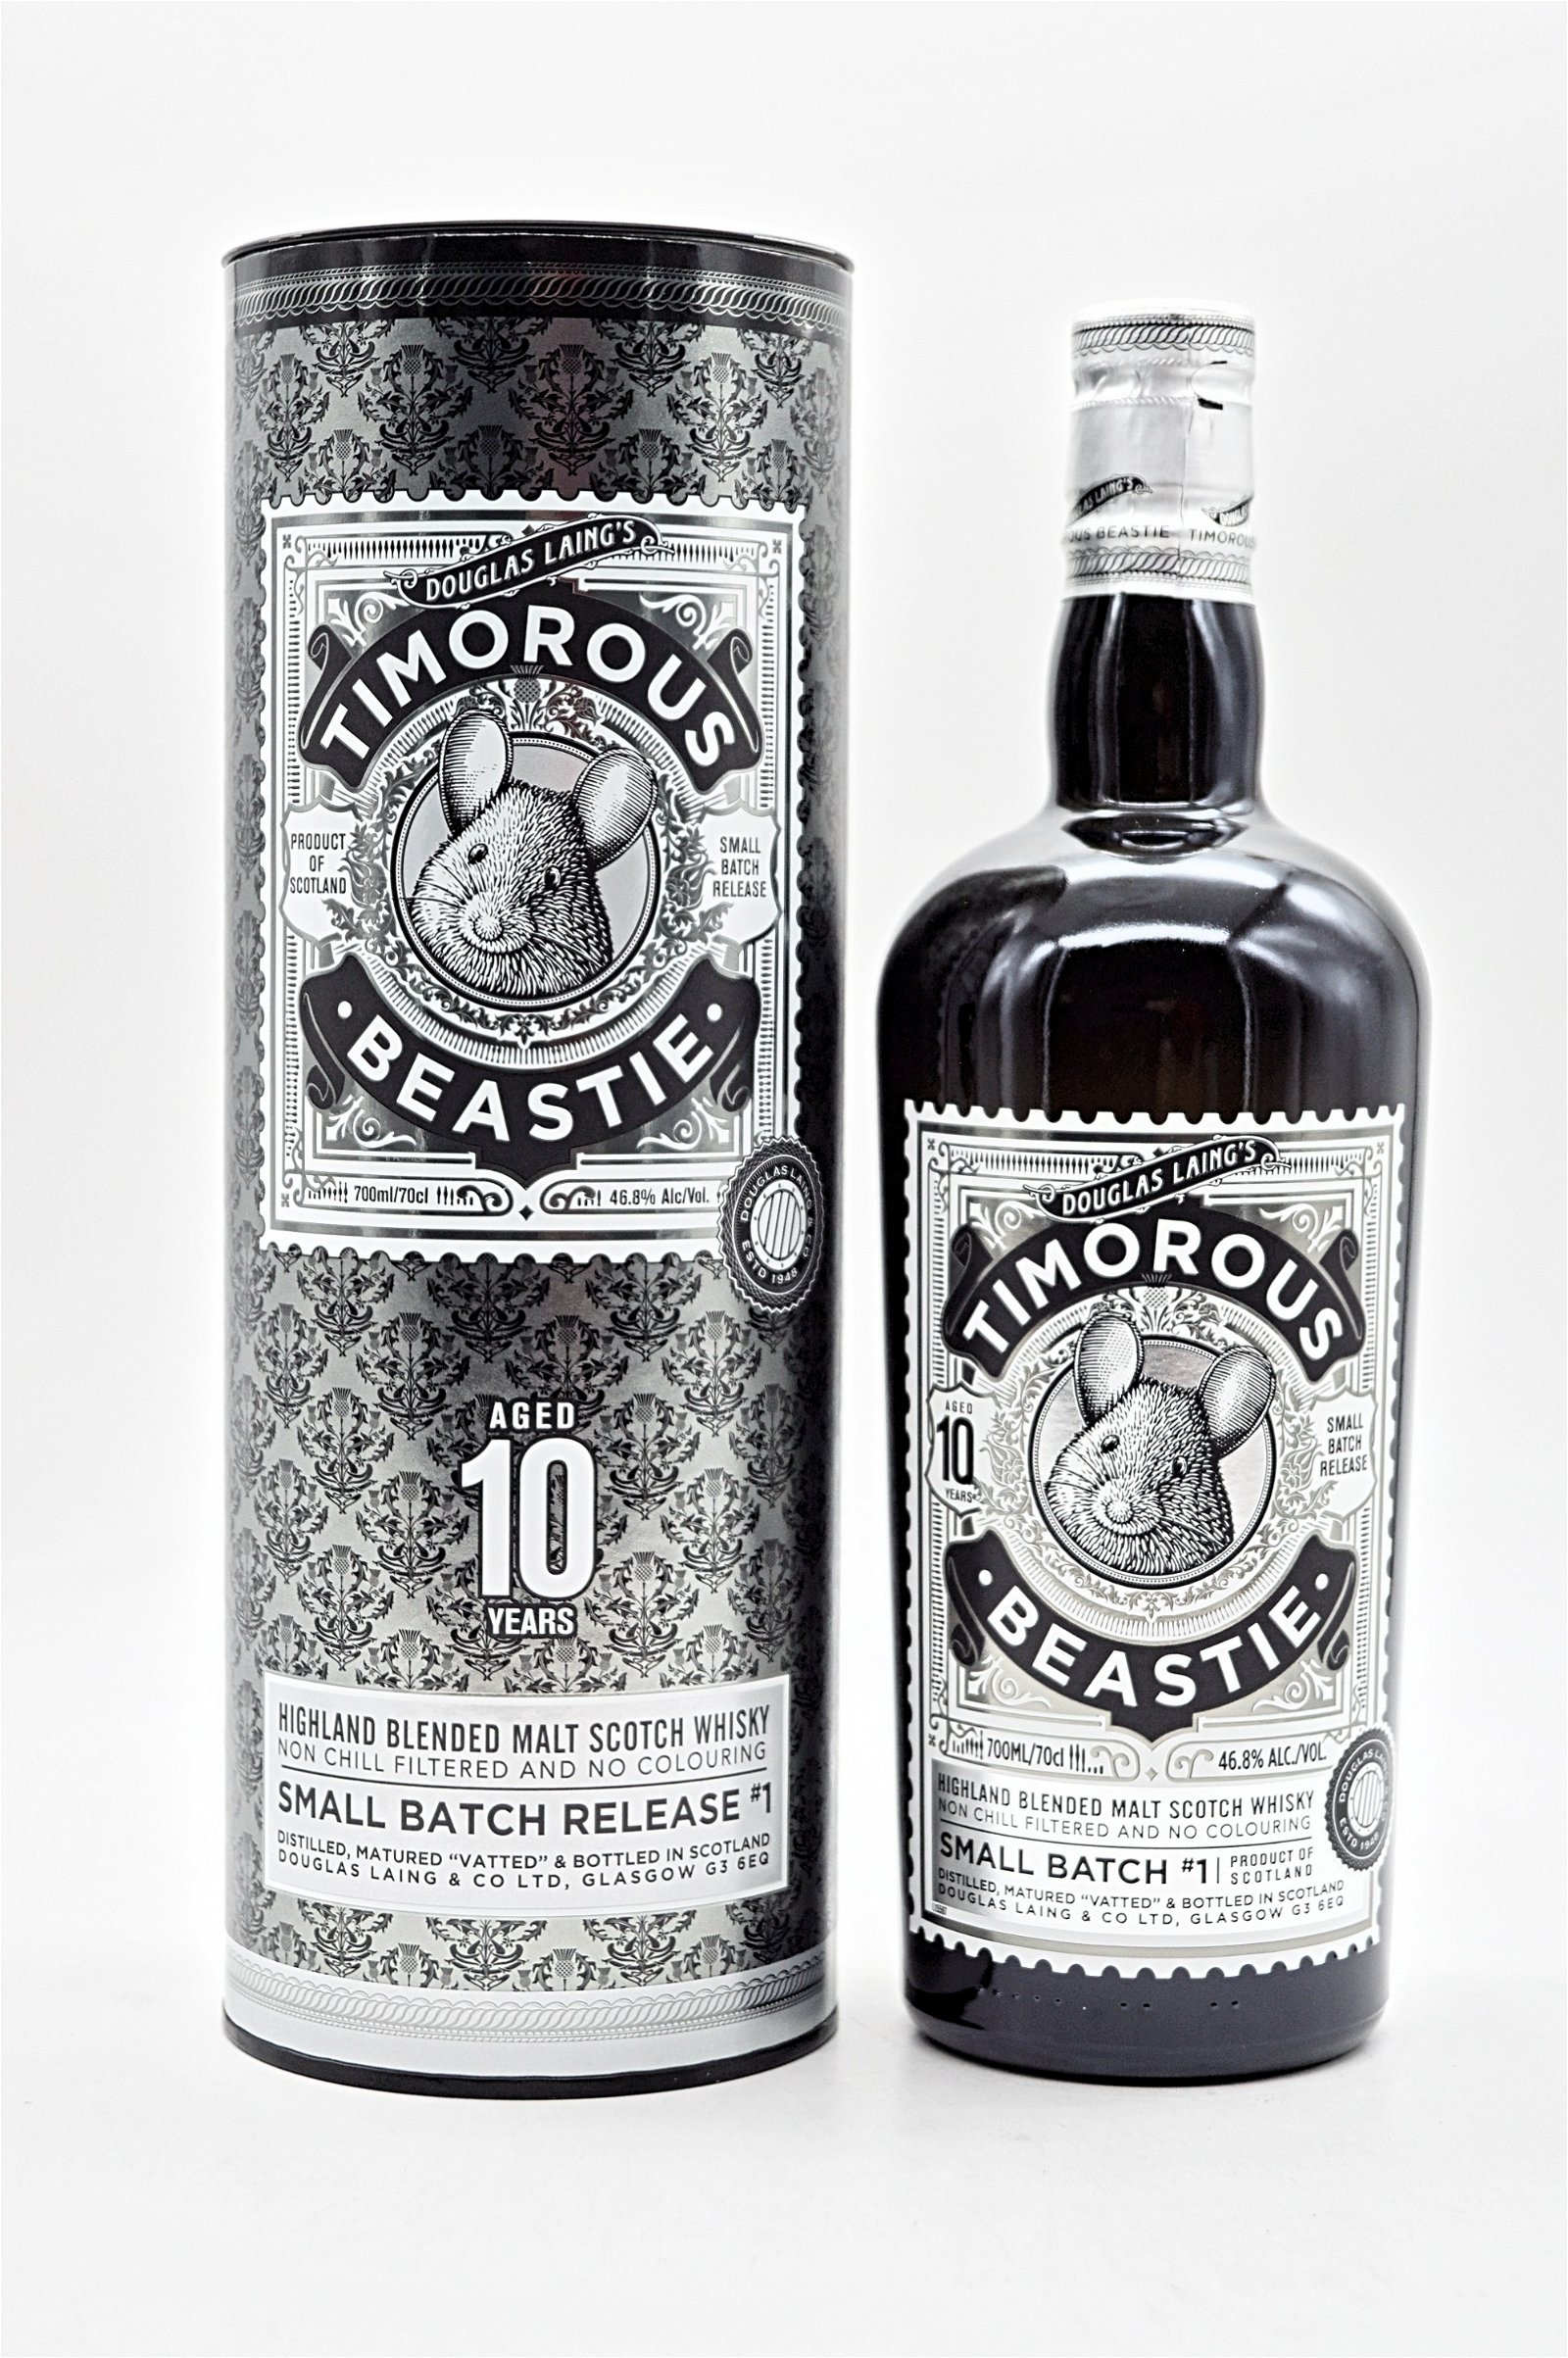 Timorous Beastie 10 Jahre Small Batch Release #1 Highland Blended Malt Scotch Whisky